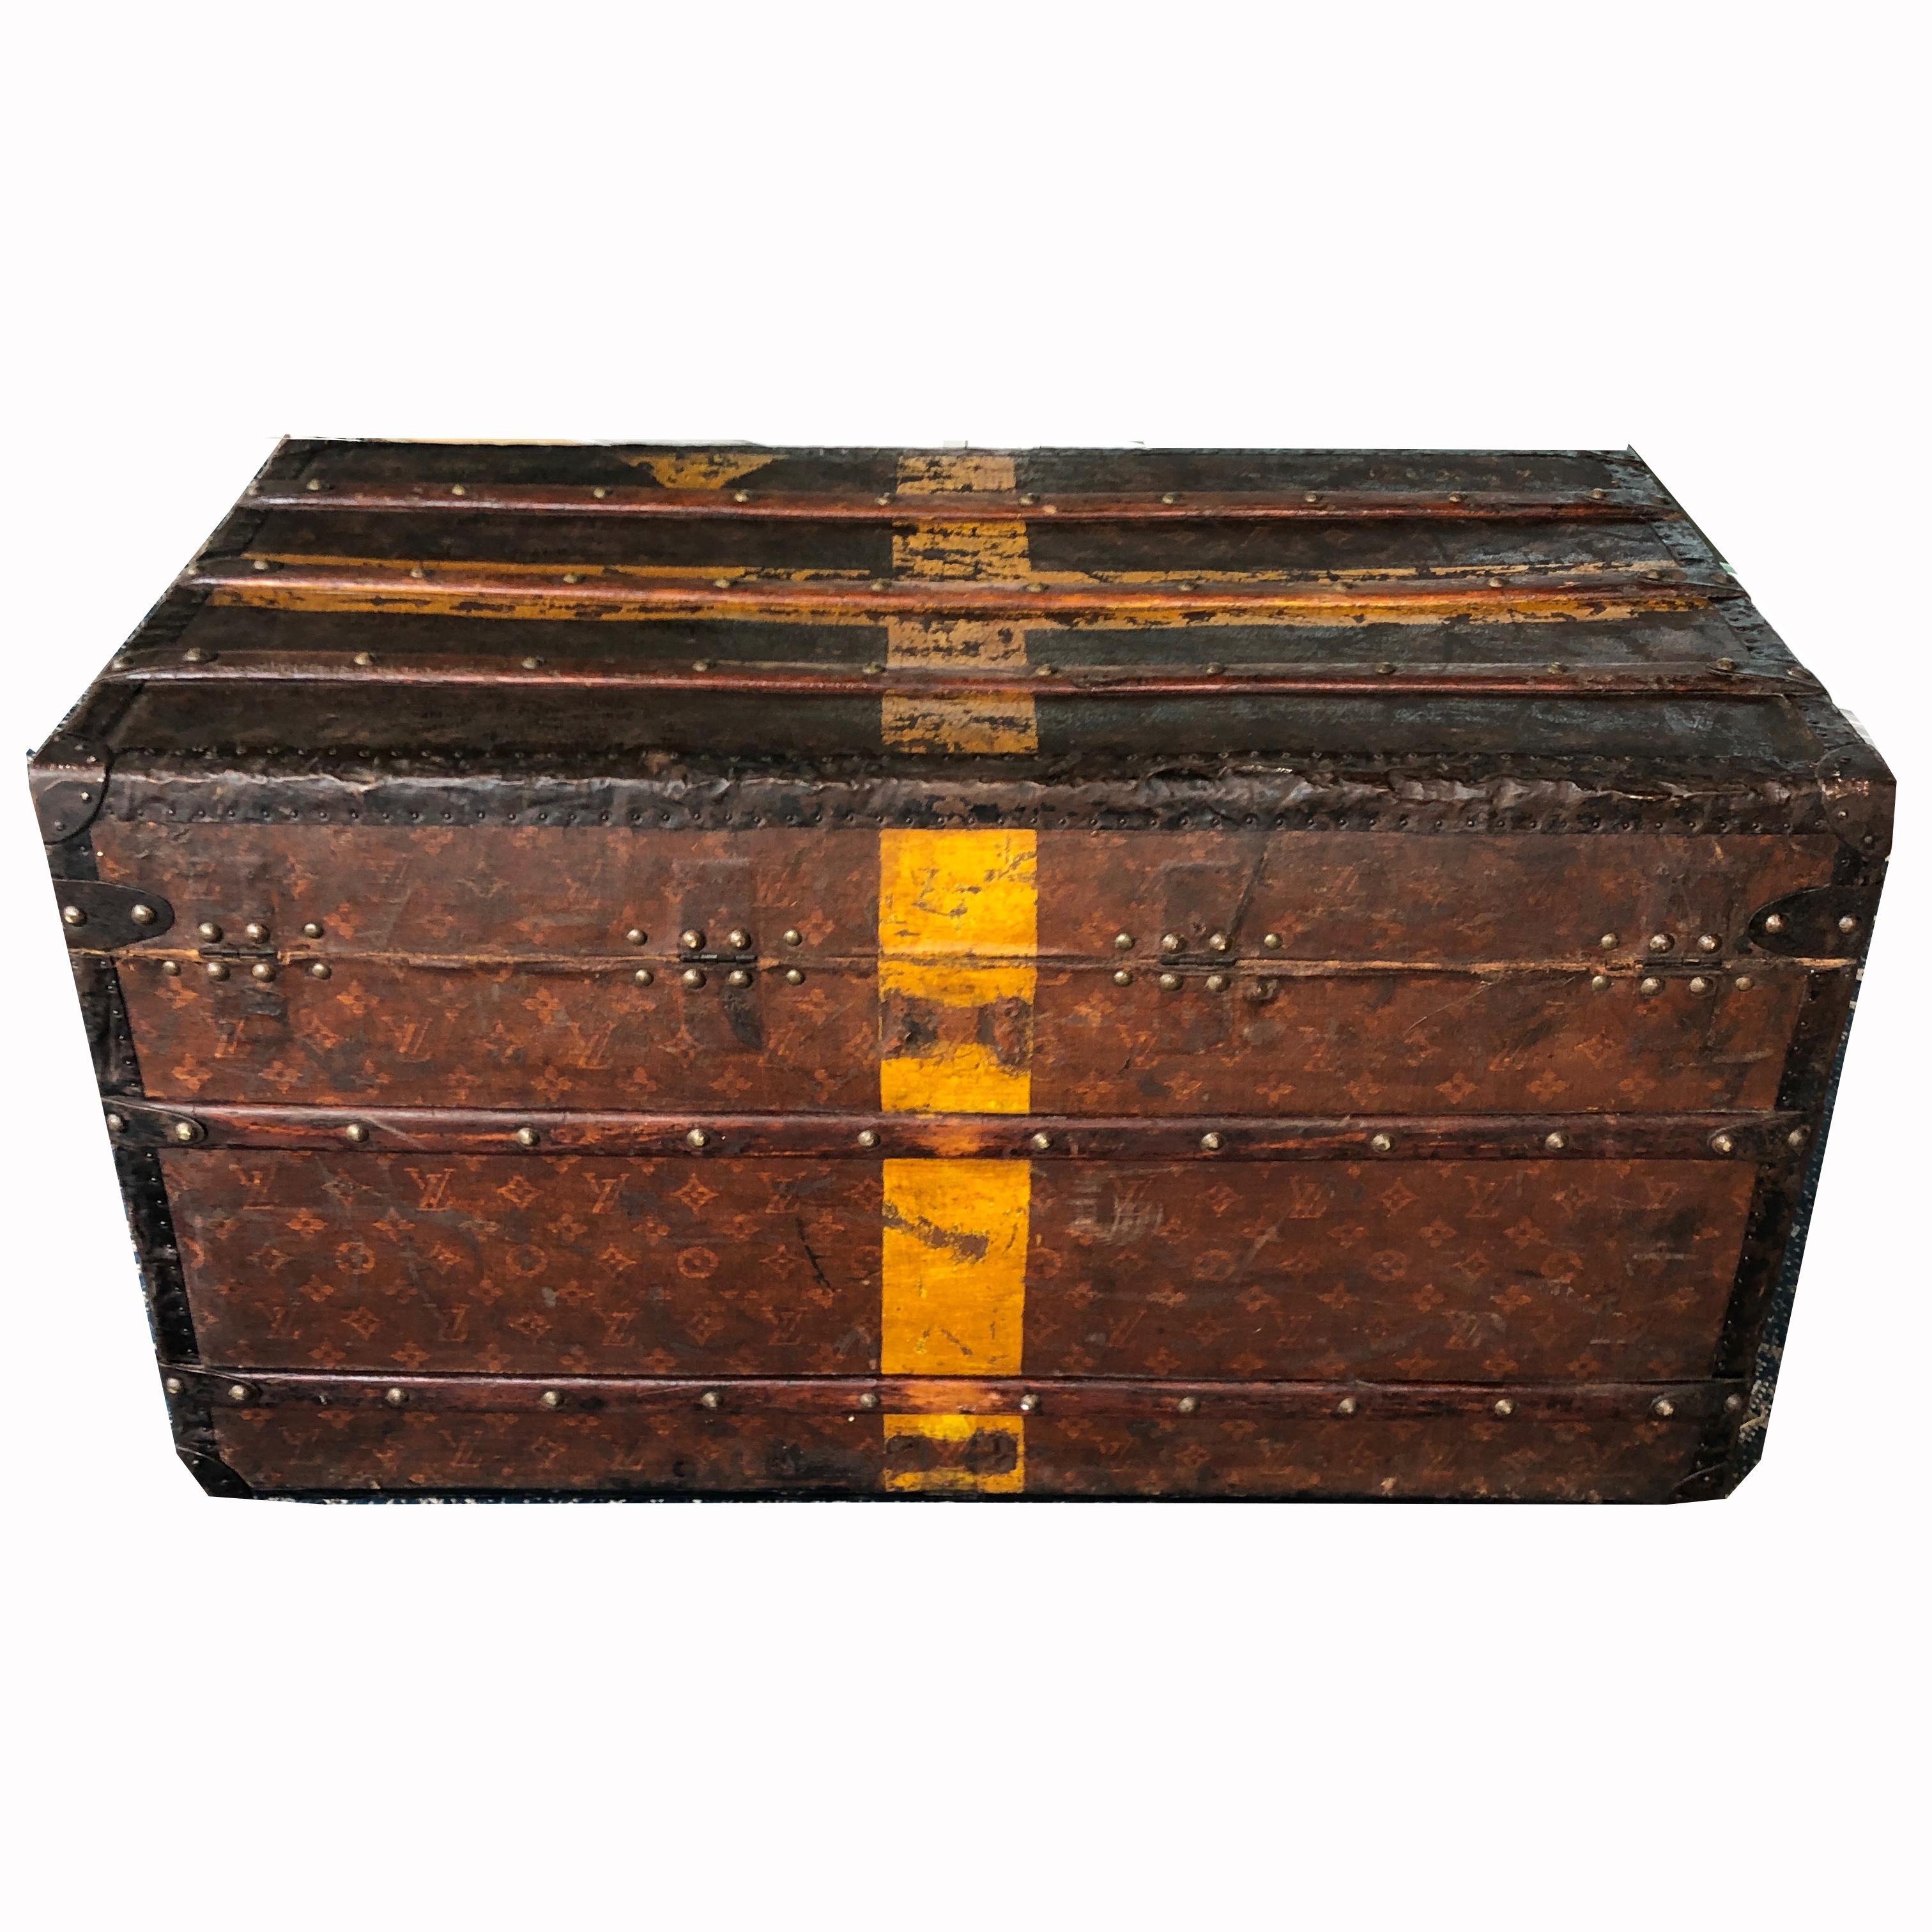 Brown Louis Vuitton Steamer Trunk Monogram Canvas with 3 Insert Trays Early 20th C